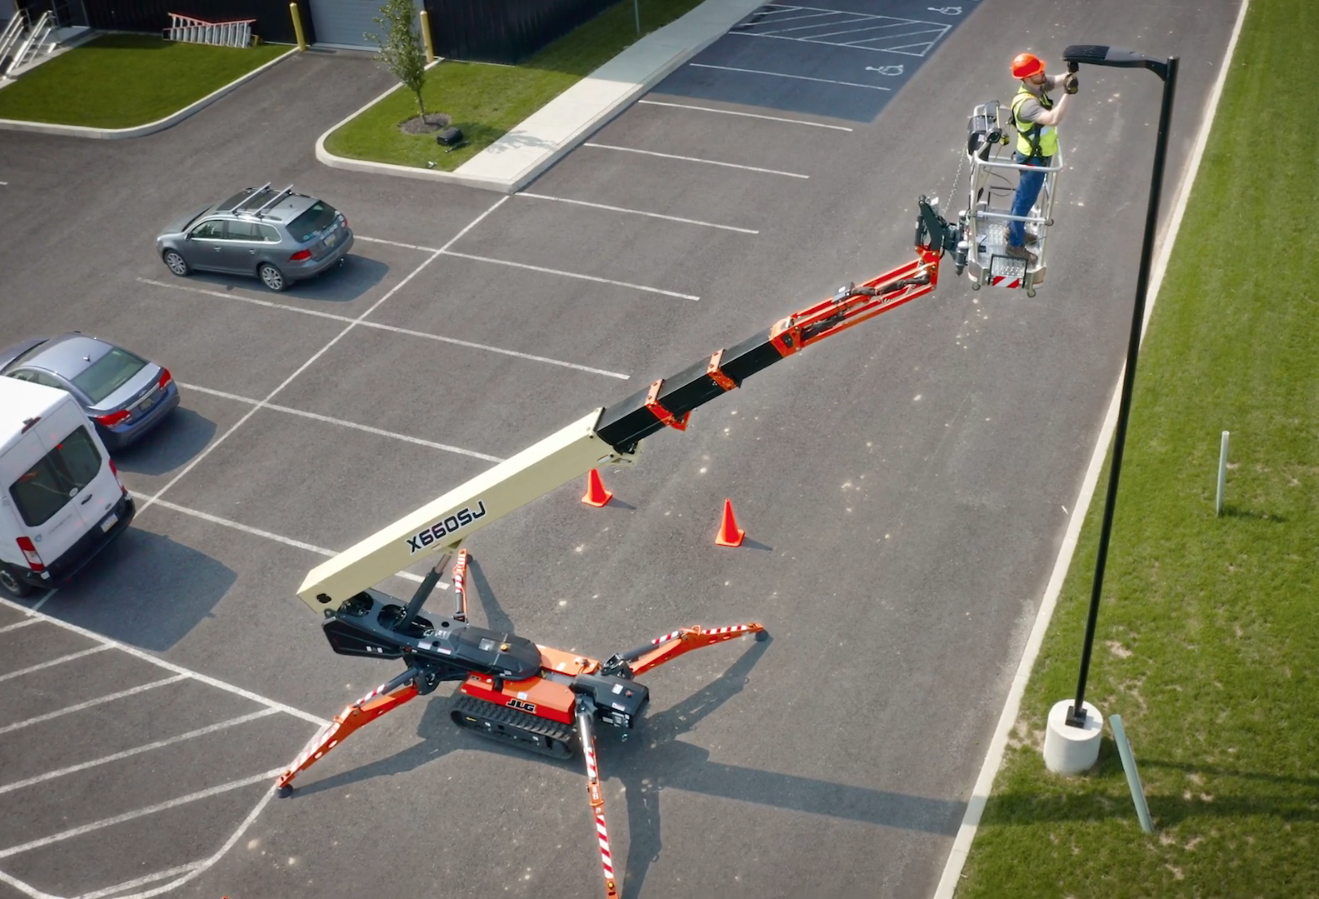 JLG Compact Boom Lift in action 